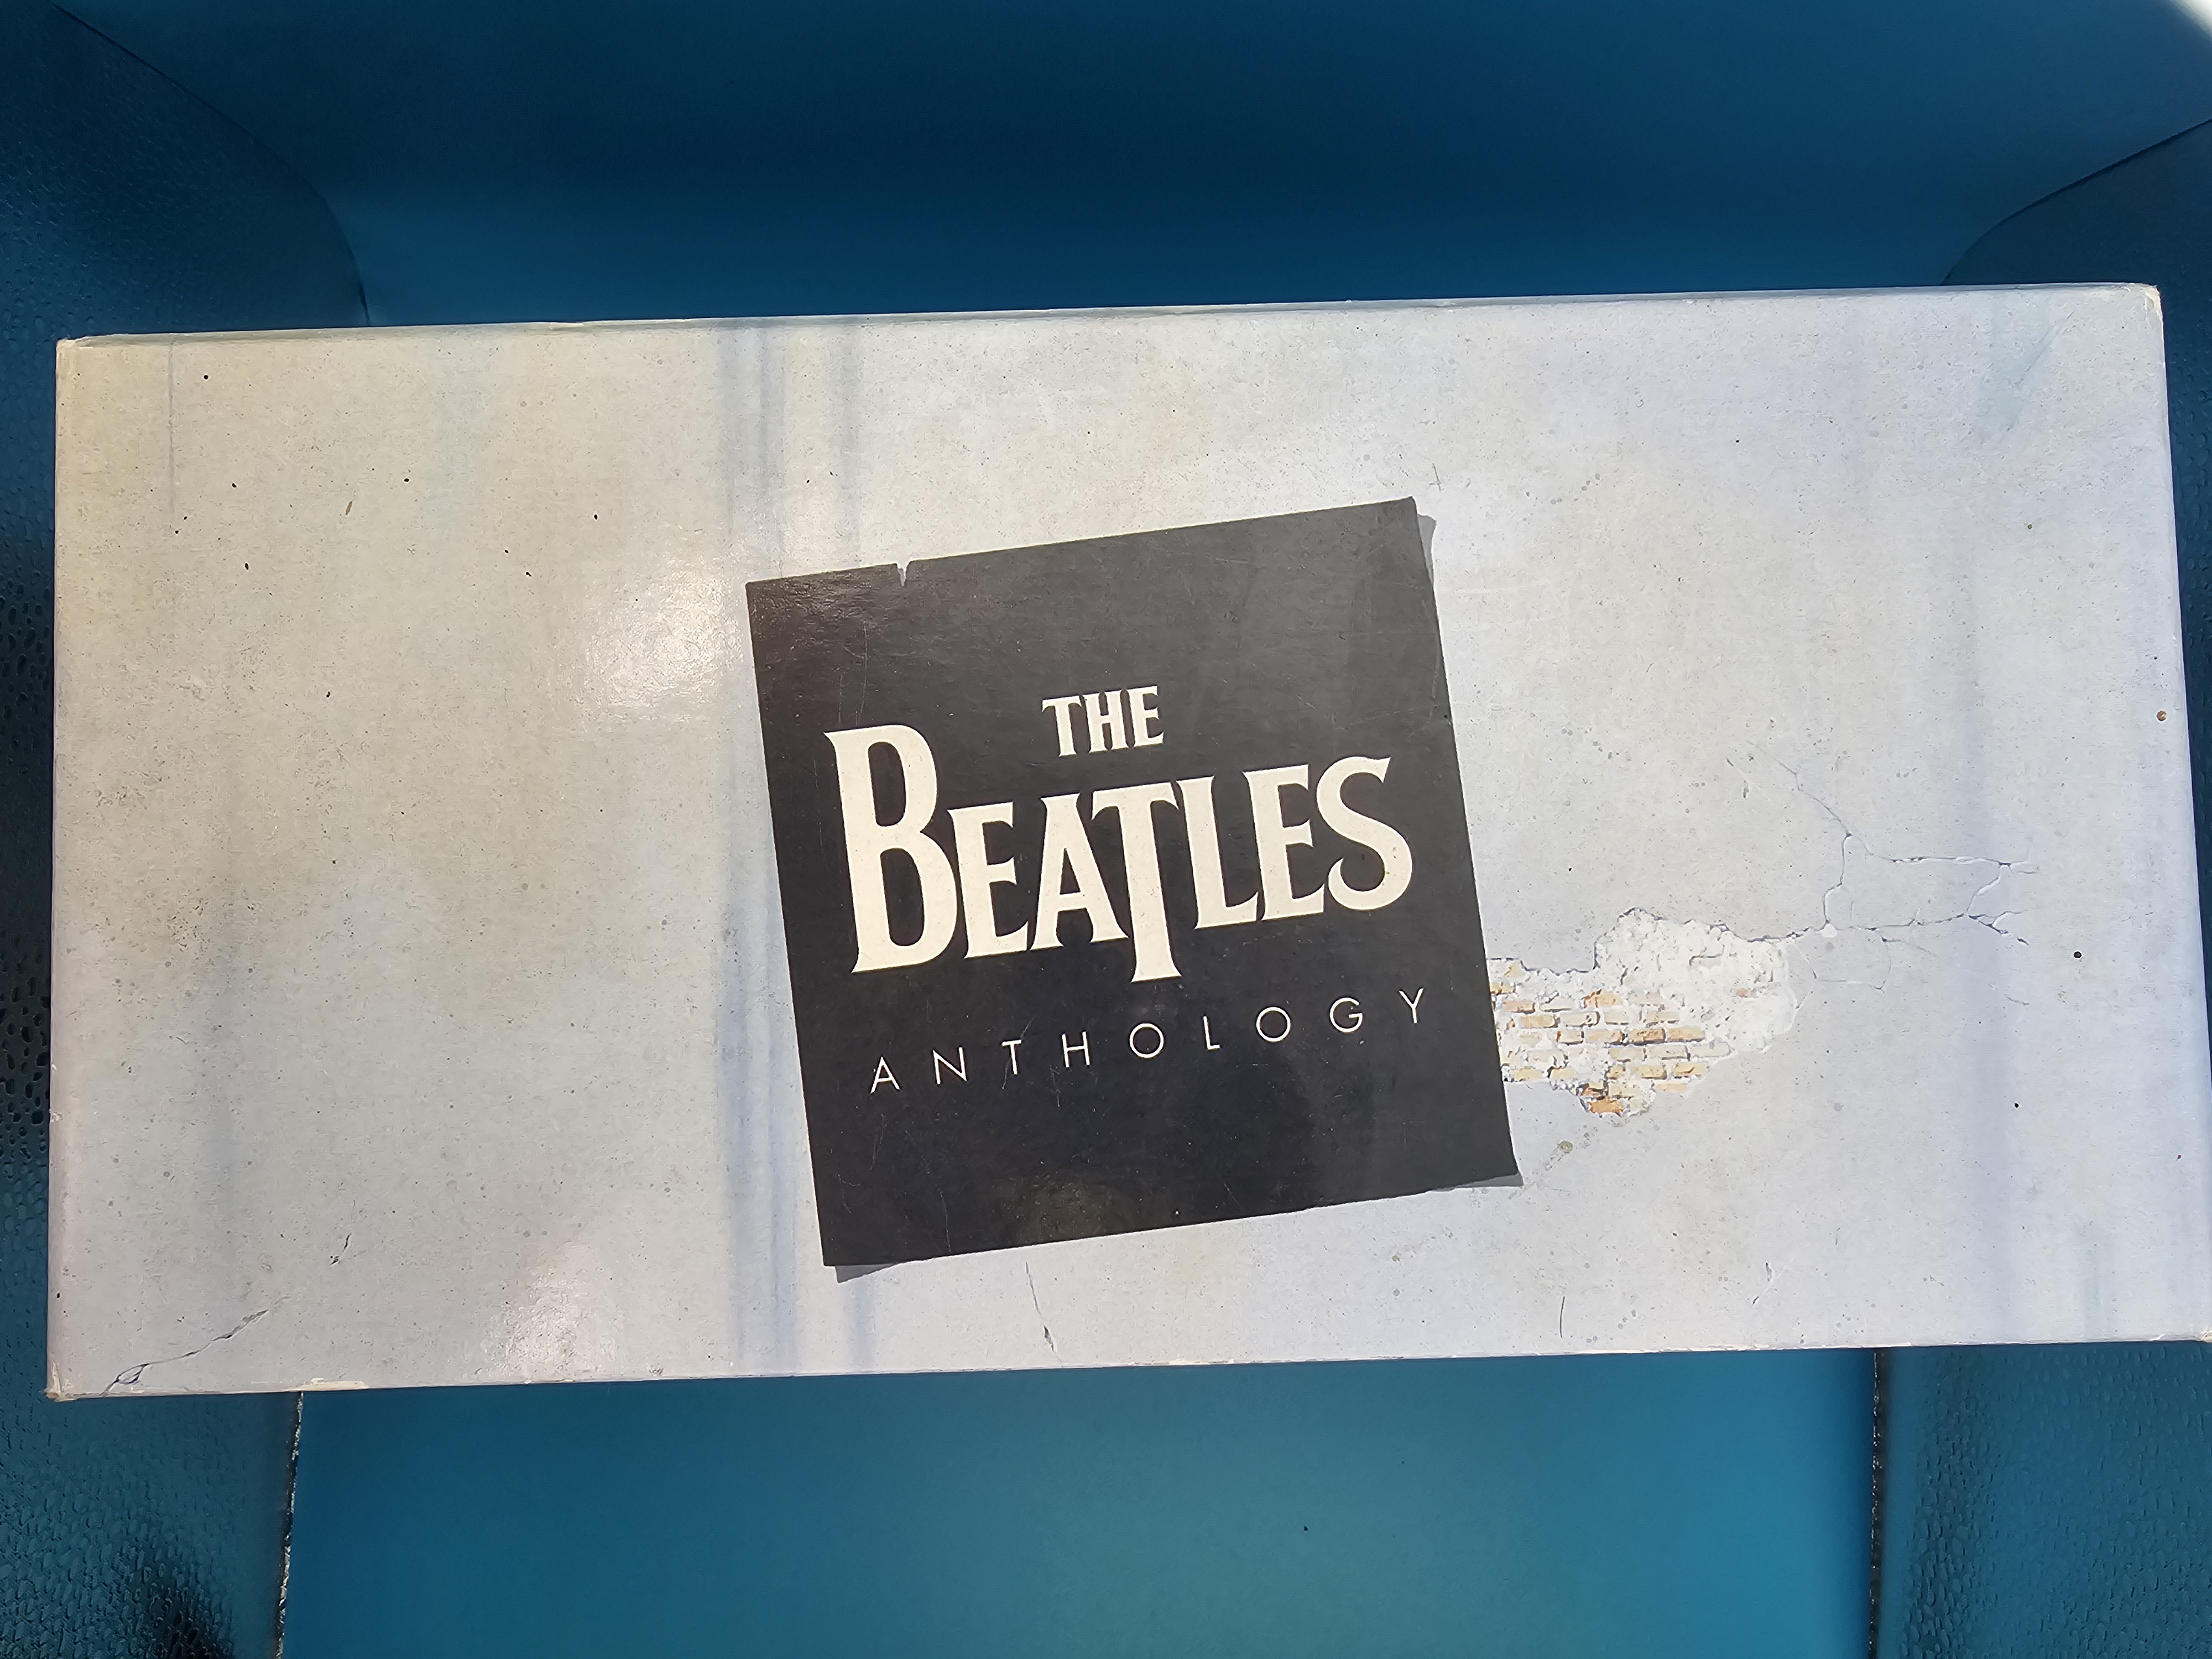 The Beatles Anthology 8 Video Box Set in mint condition - Image 3 of 7